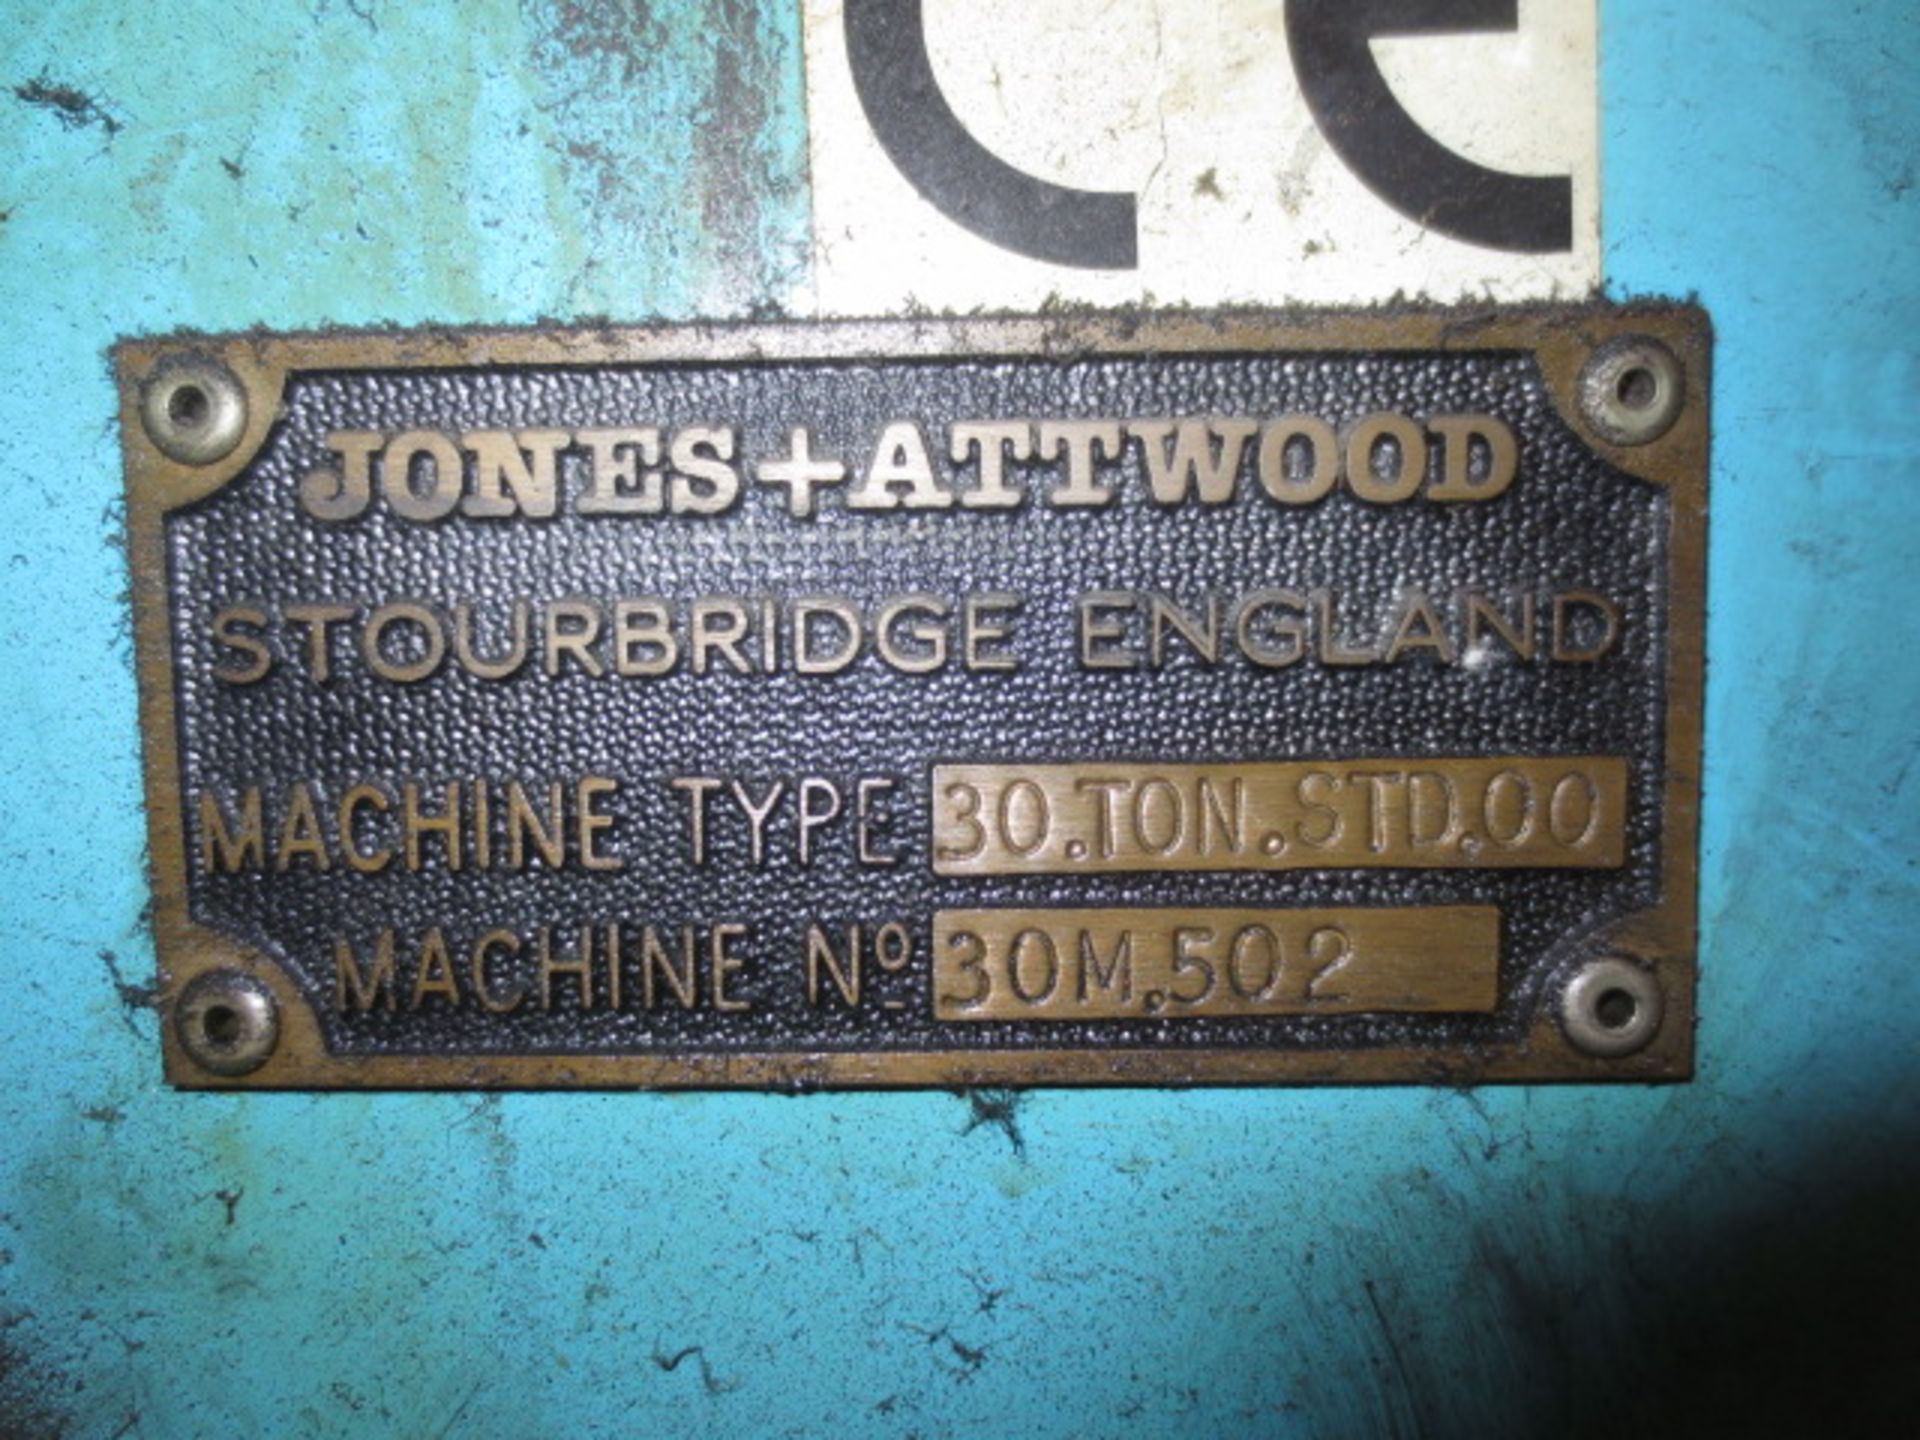 Jones & Altwood 30 ton STD.00, Serial No 30M502 inclinable power press  (A Work Method Statement and - Image 4 of 4